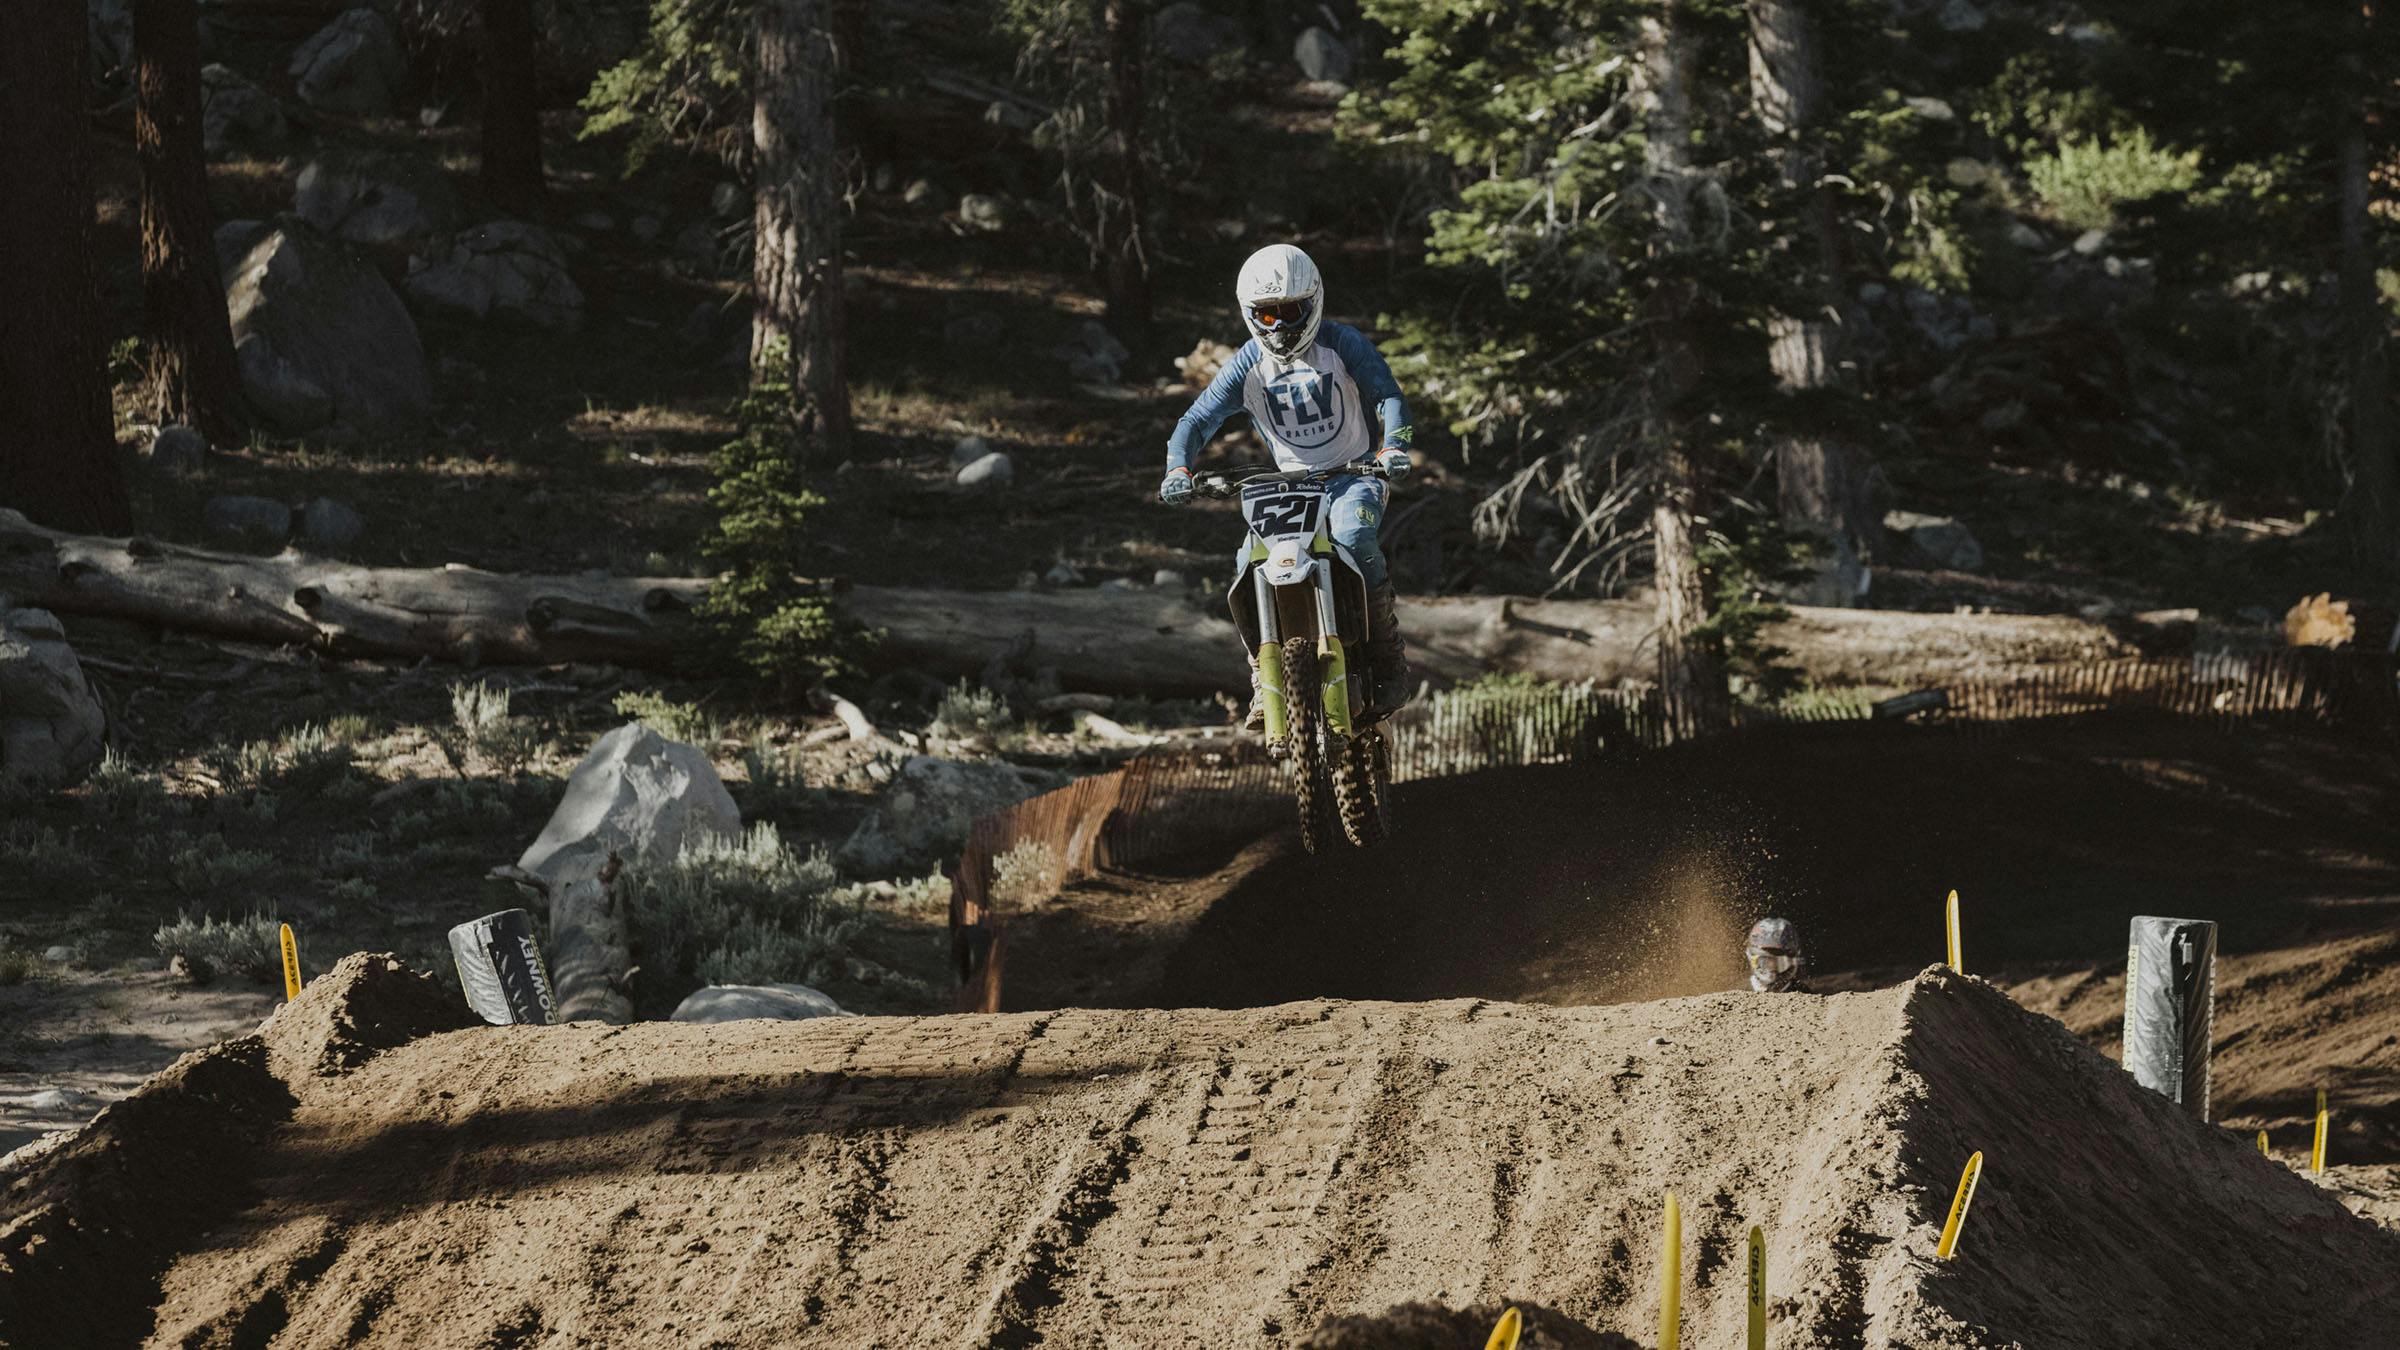 Mammoth Motocross racer catching some air